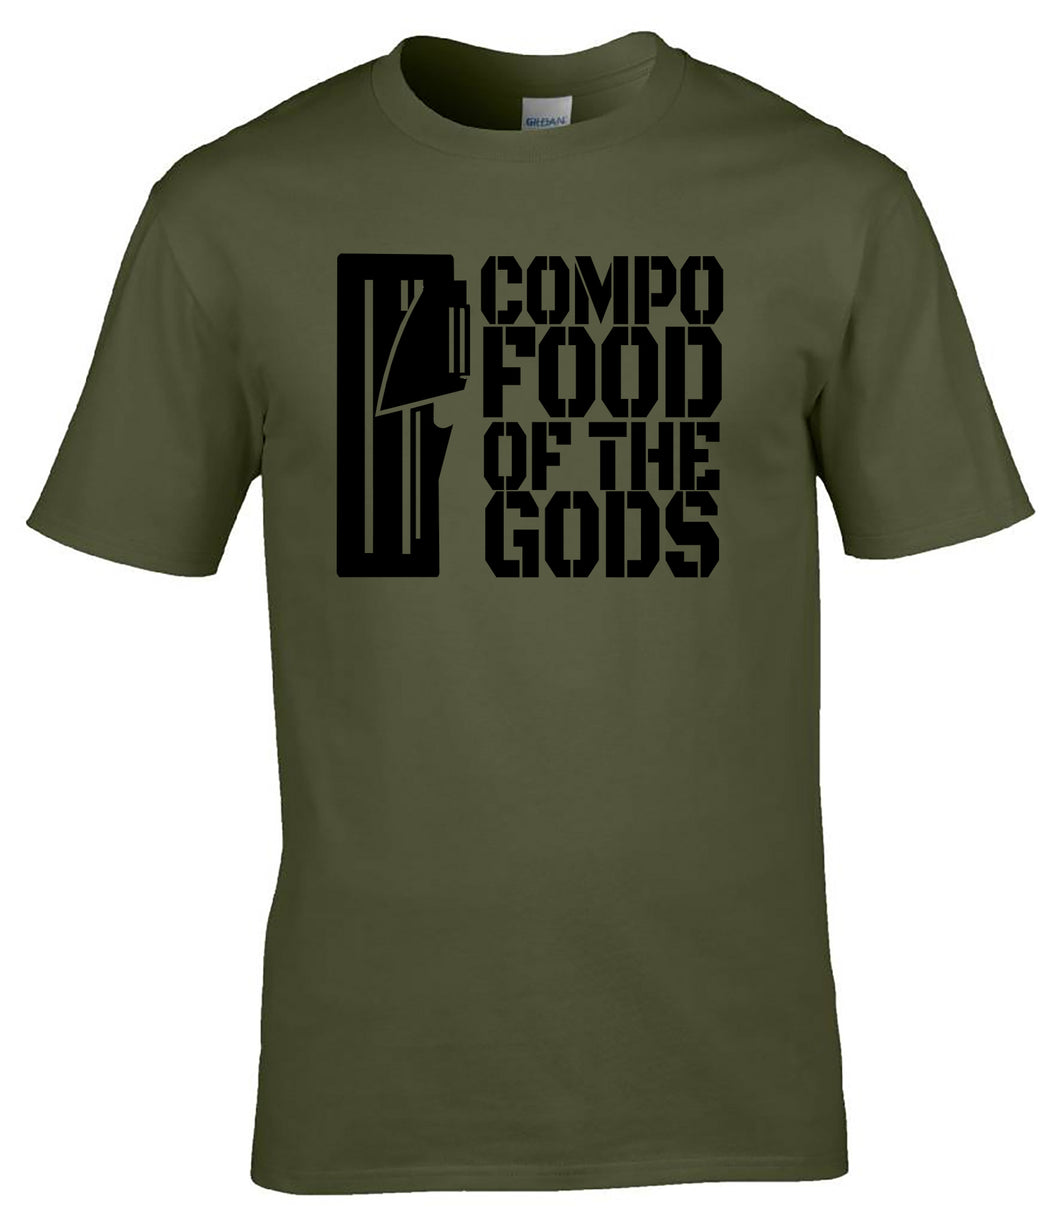 Military Humor - Compo, Food of the Gods